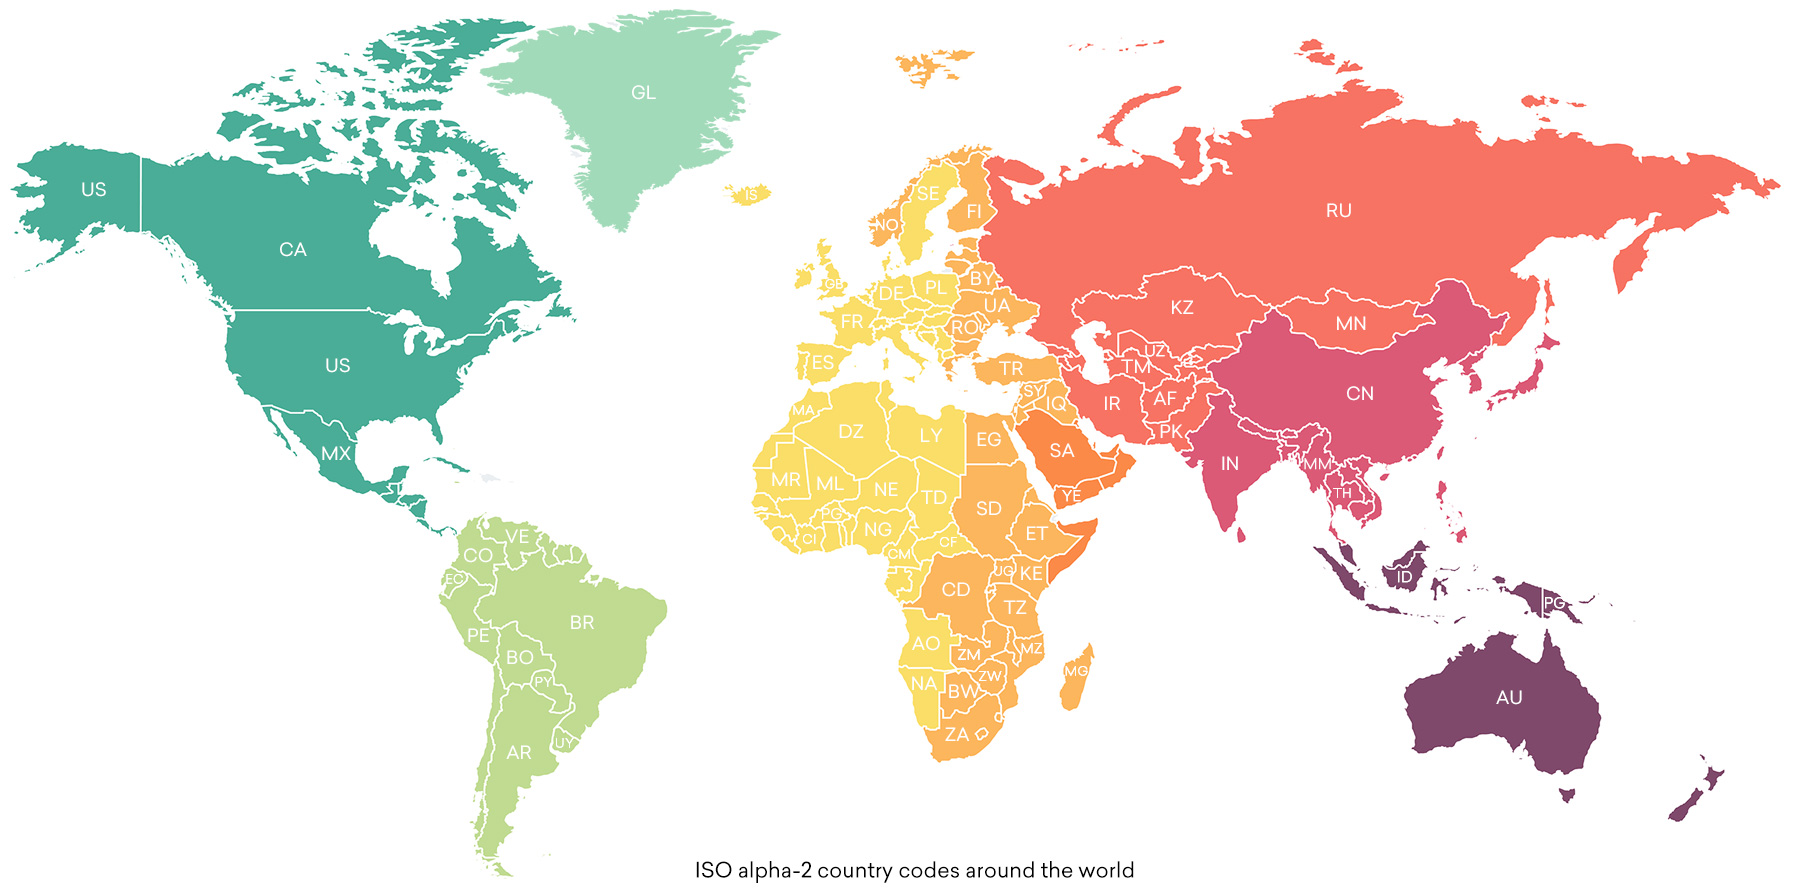 ISO Alpha-2 country codes around the world